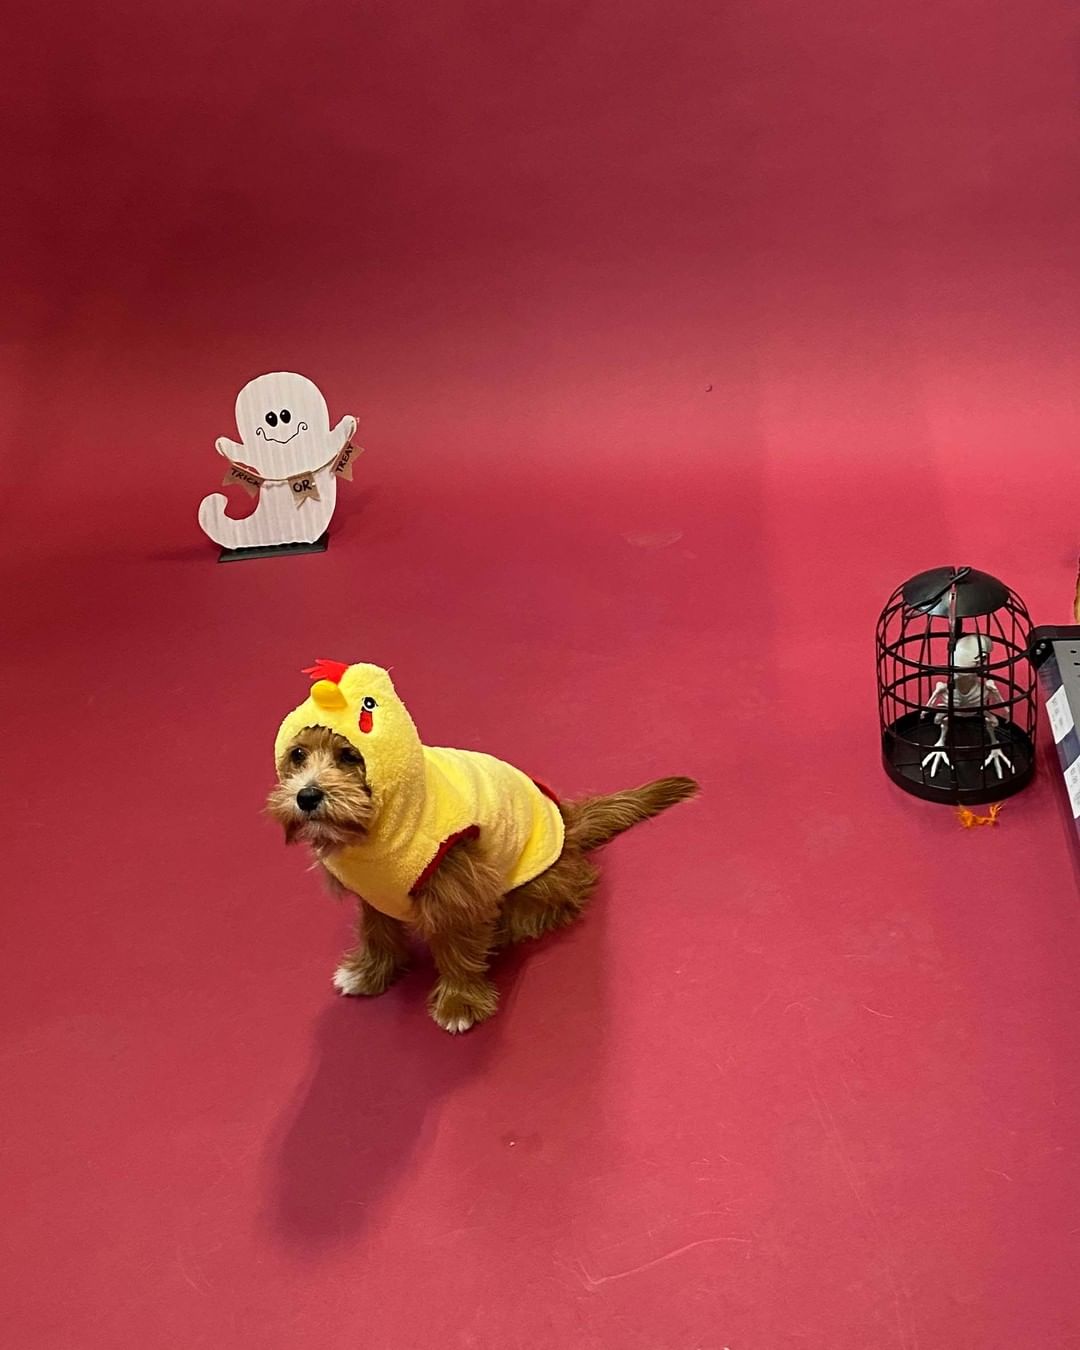 Wishing everyday was a doggy photoshoot day! 🥺

Check out some of the behind-the-scenes snaps from Saturday’s HOWL O’WEEN photoshoot fundraiser! A big thank you to everyone who came out to make this day a big success, to @renspets Liberty Village for hosting and to @capturenorthstudios for volunteering to be our awesome photographer.
.
.
.
.
.
.
<a target='_blank' href='https://www.instagram.com/explore/tags/DogHalloween/'>#DogHalloween</a> <a target='_blank' href='https://www.instagram.com/explore/tags/HalloweenDogCostumes/'>#HalloweenDogCostumes</a> <a target='_blank' href='https://www.instagram.com/explore/tags/HalloweenForDogs/'>#HalloweenForDogs</a> <a target='_blank' href='https://www.instagram.com/explore/tags/DogRescue/'>#DogRescue</a> <a target='_blank' href='https://www.instagram.com/explore/tags/Fundraiser/'>#Fundraiser</a> <a target='_blank' href='https://www.instagram.com/explore/tags/TorontoEvents/'>#TorontoEvents</a> <a target='_blank' href='https://www.instagram.com/explore/tags/TorontoDogMoms/'>#TorontoDogMoms</a> <a target='_blank' href='https://www.instagram.com/explore/tags/TorontoDogDads/'>#TorontoDogDads</a> <a target='_blank' href='https://www.instagram.com/explore/tags/TorontoDogs/'>#TorontoDogs</a> <a target='_blank' href='https://www.instagram.com/explore/tags/DogsInThe6ix/'>#DogsInThe6ix</a> <a target='_blank' href='https://www.instagram.com/explore/tags/StrayToPlay/'>#StrayToPlay</a> <a target='_blank' href='https://www.instagram.com/explore/tags/DogCostumes/'>#DogCostumes</a> <a target='_blank' href='https://www.instagram.com/explore/tags/DogPhotoshoot/'>#DogPhotoshoot</a>